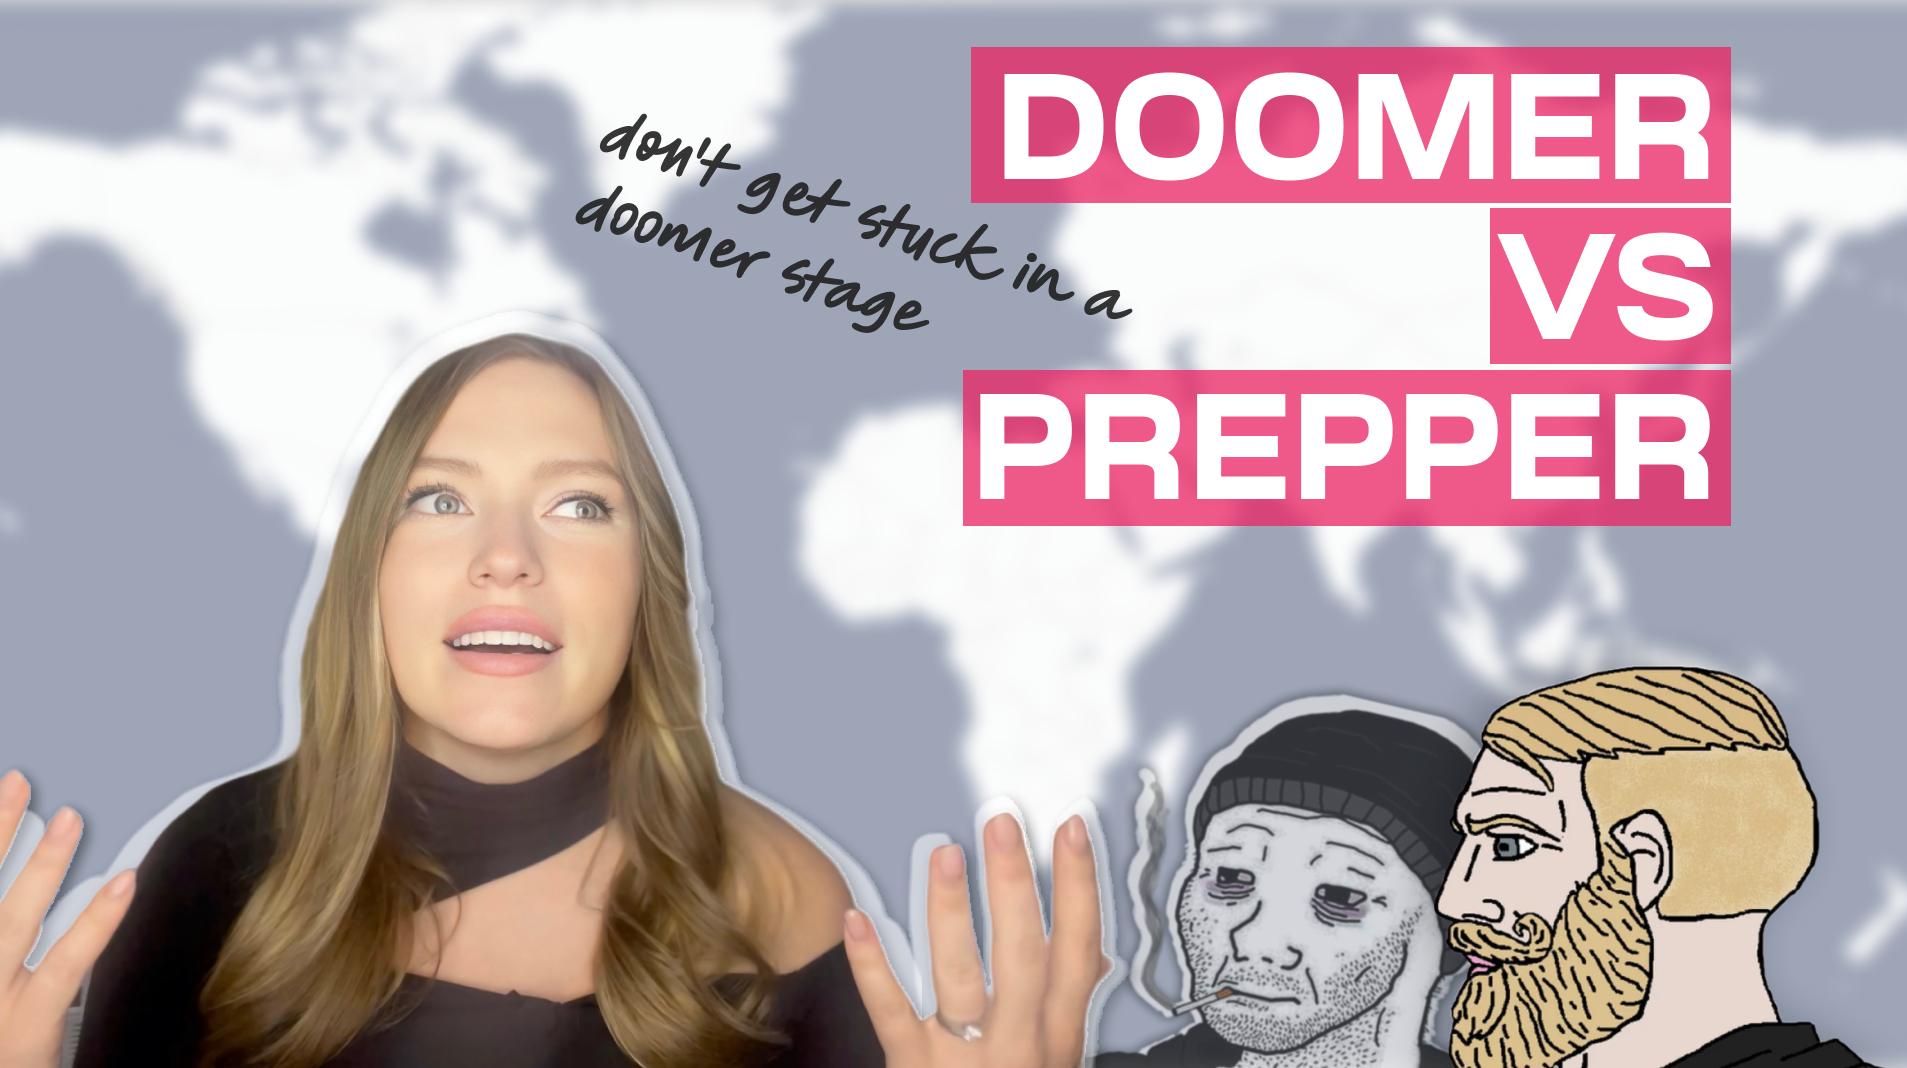 Plan B passport article about doomers and preppers